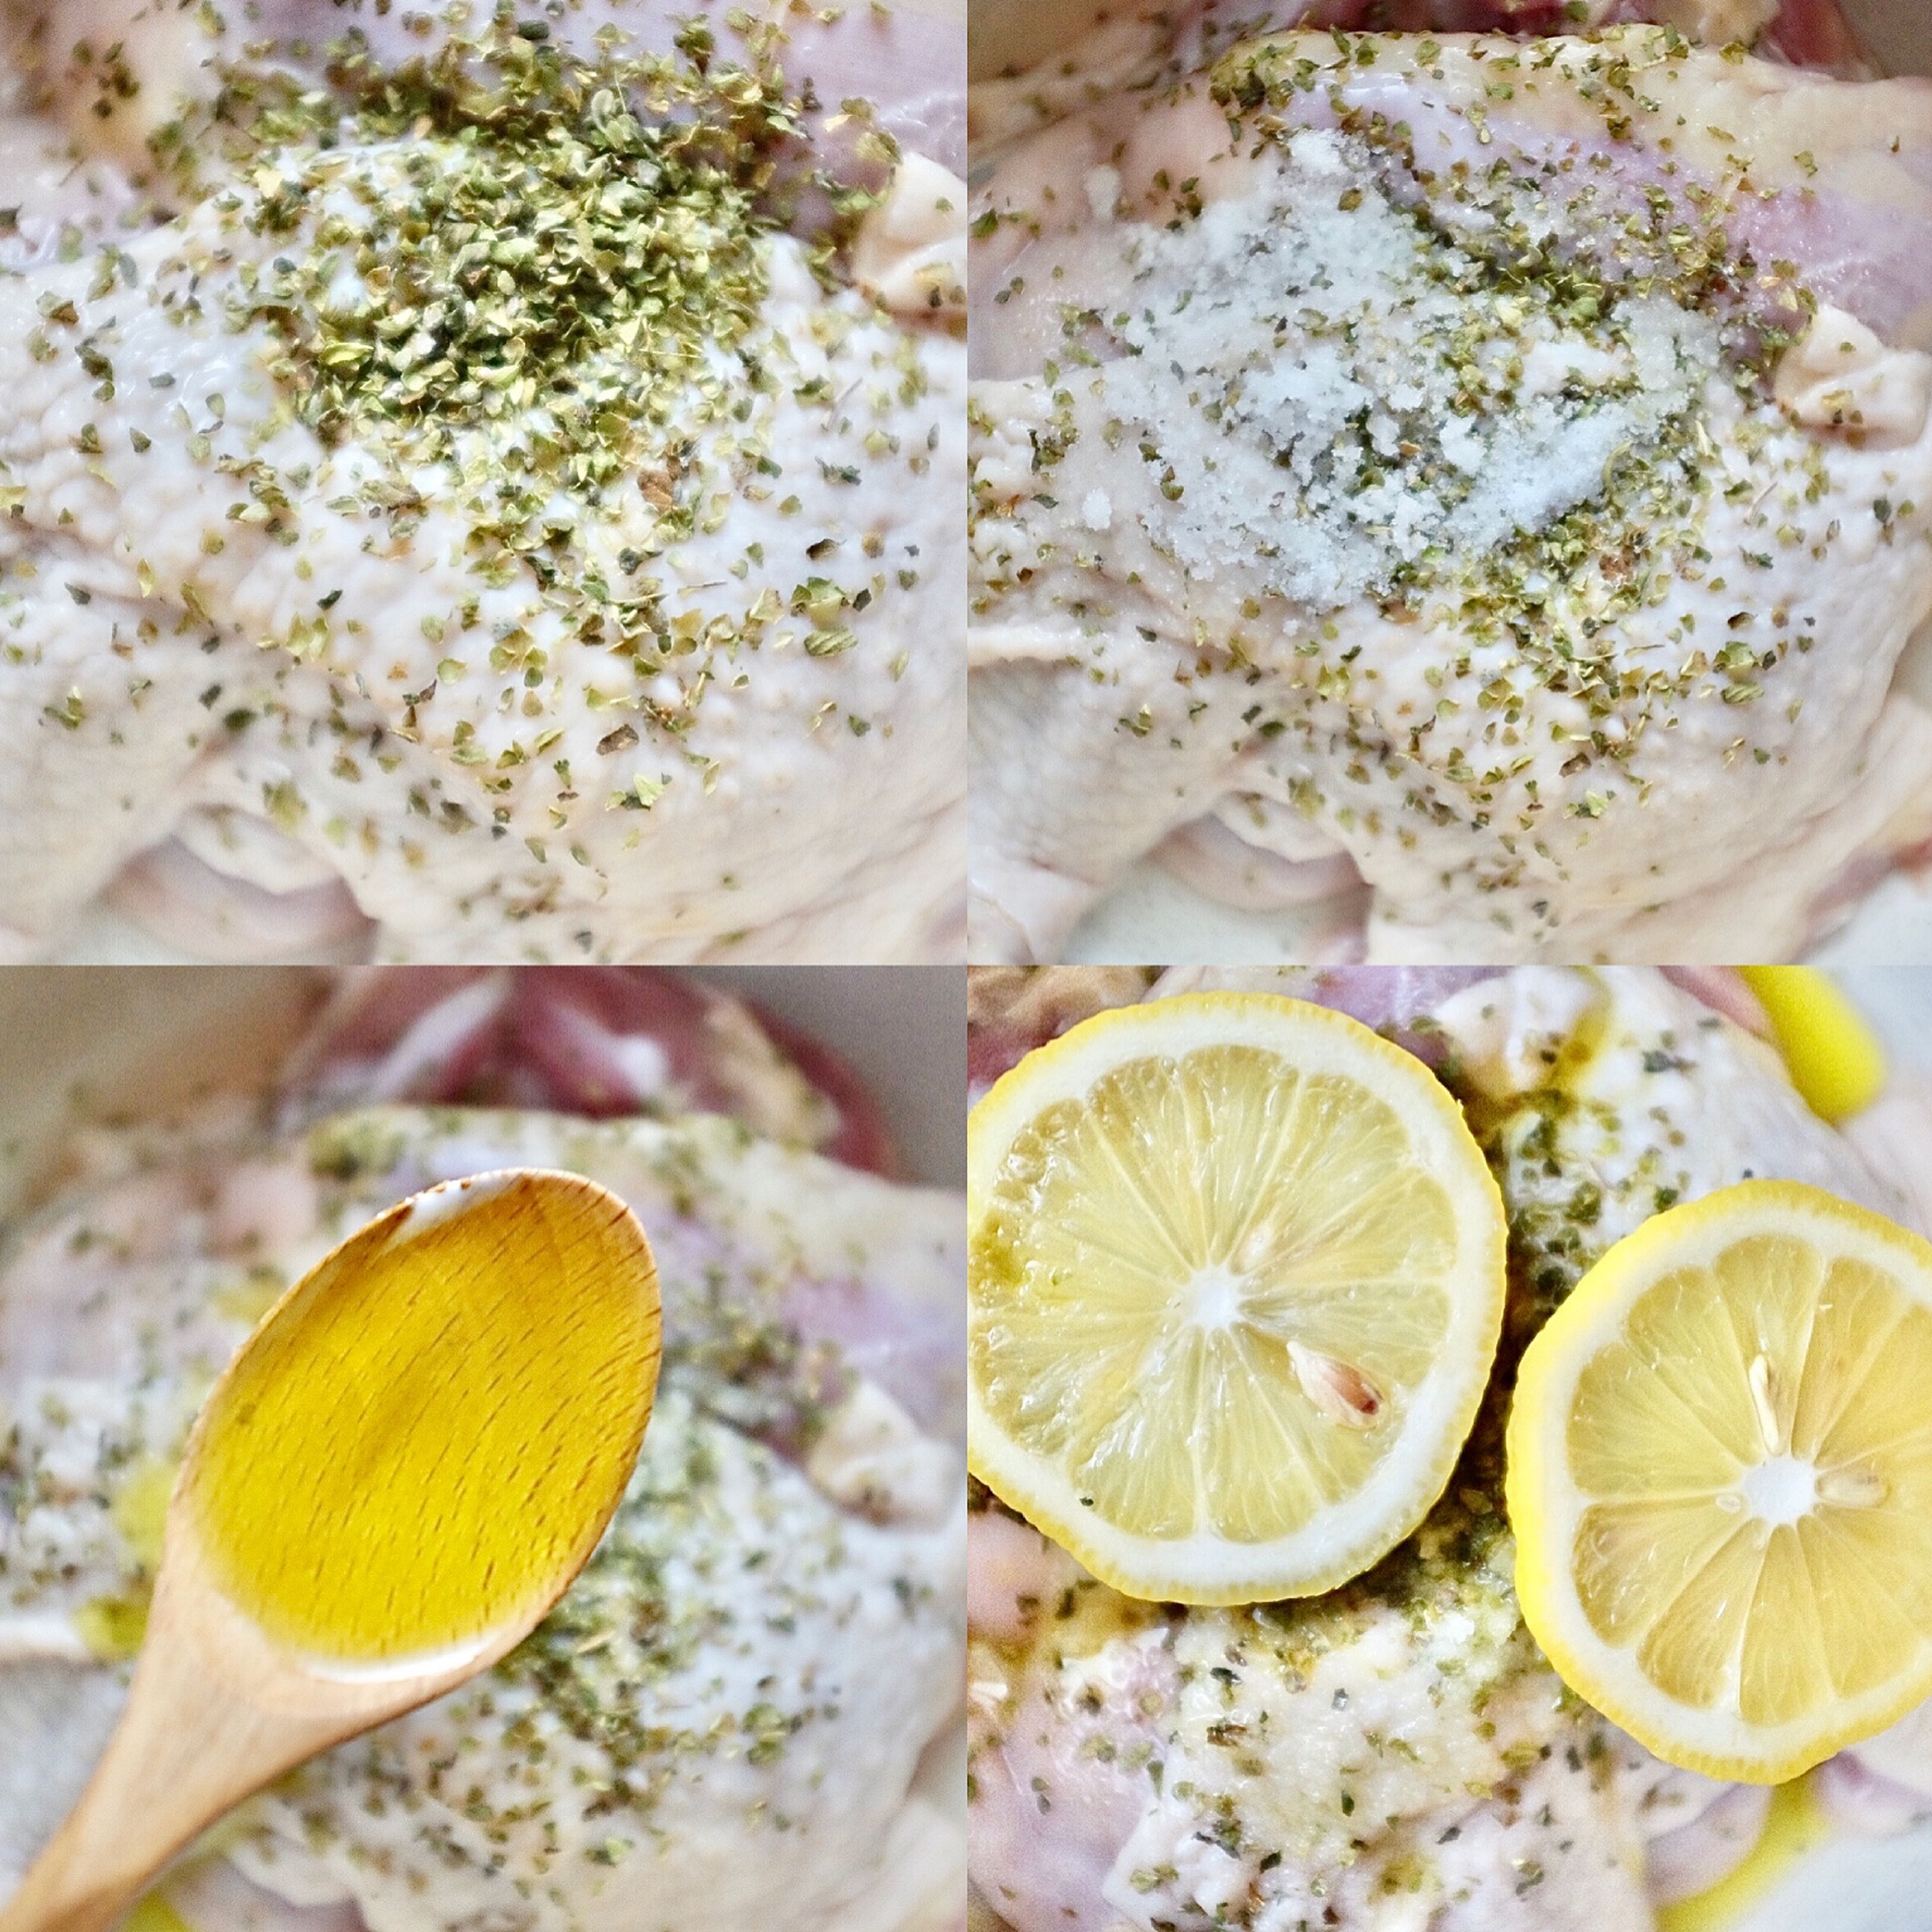 Season chicken thighs with oregano , salt , lemon ,2 tbsp of olive oil and marinade for 4 hours (better refrigerated overnight).